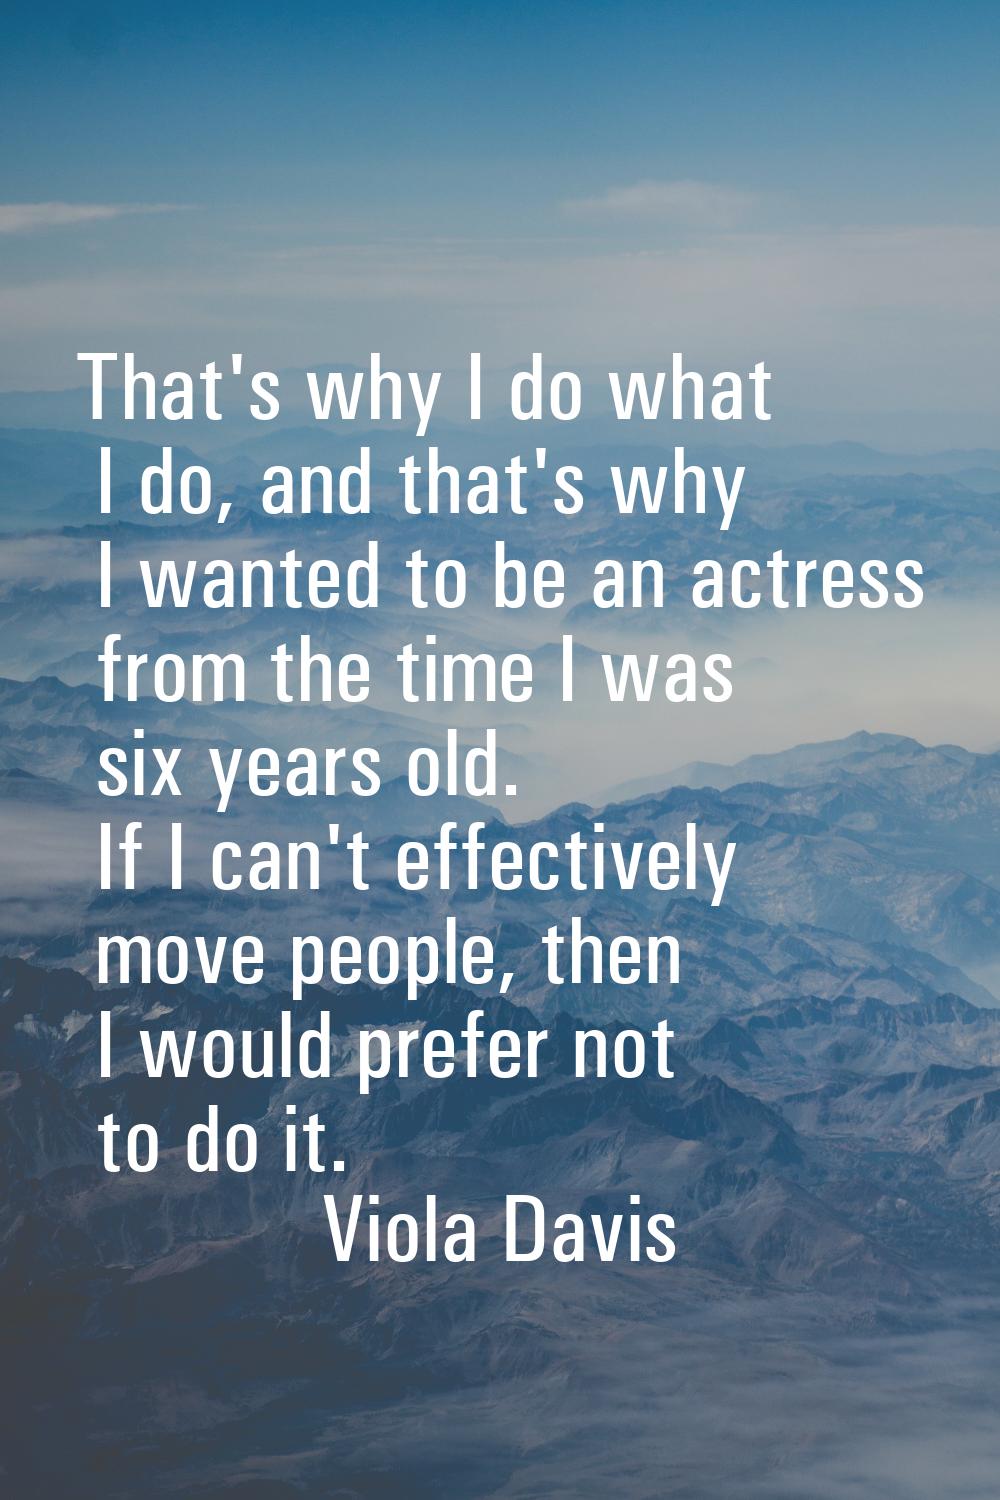 That's why I do what I do, and that's why I wanted to be an actress from the time I was six years o